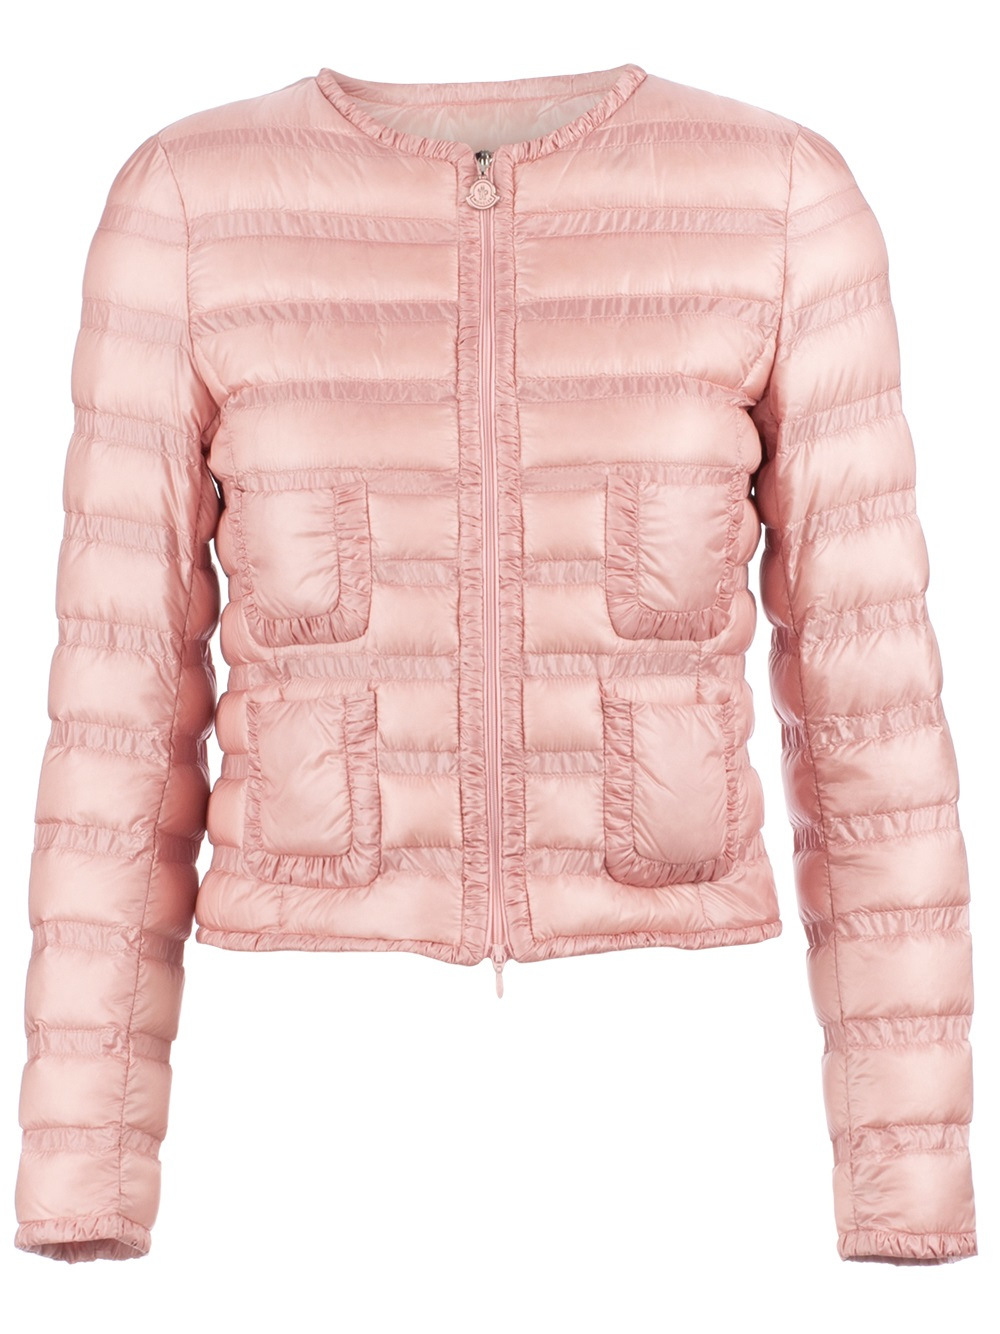 Lyst - Moncler Lissy Jacket in Pink